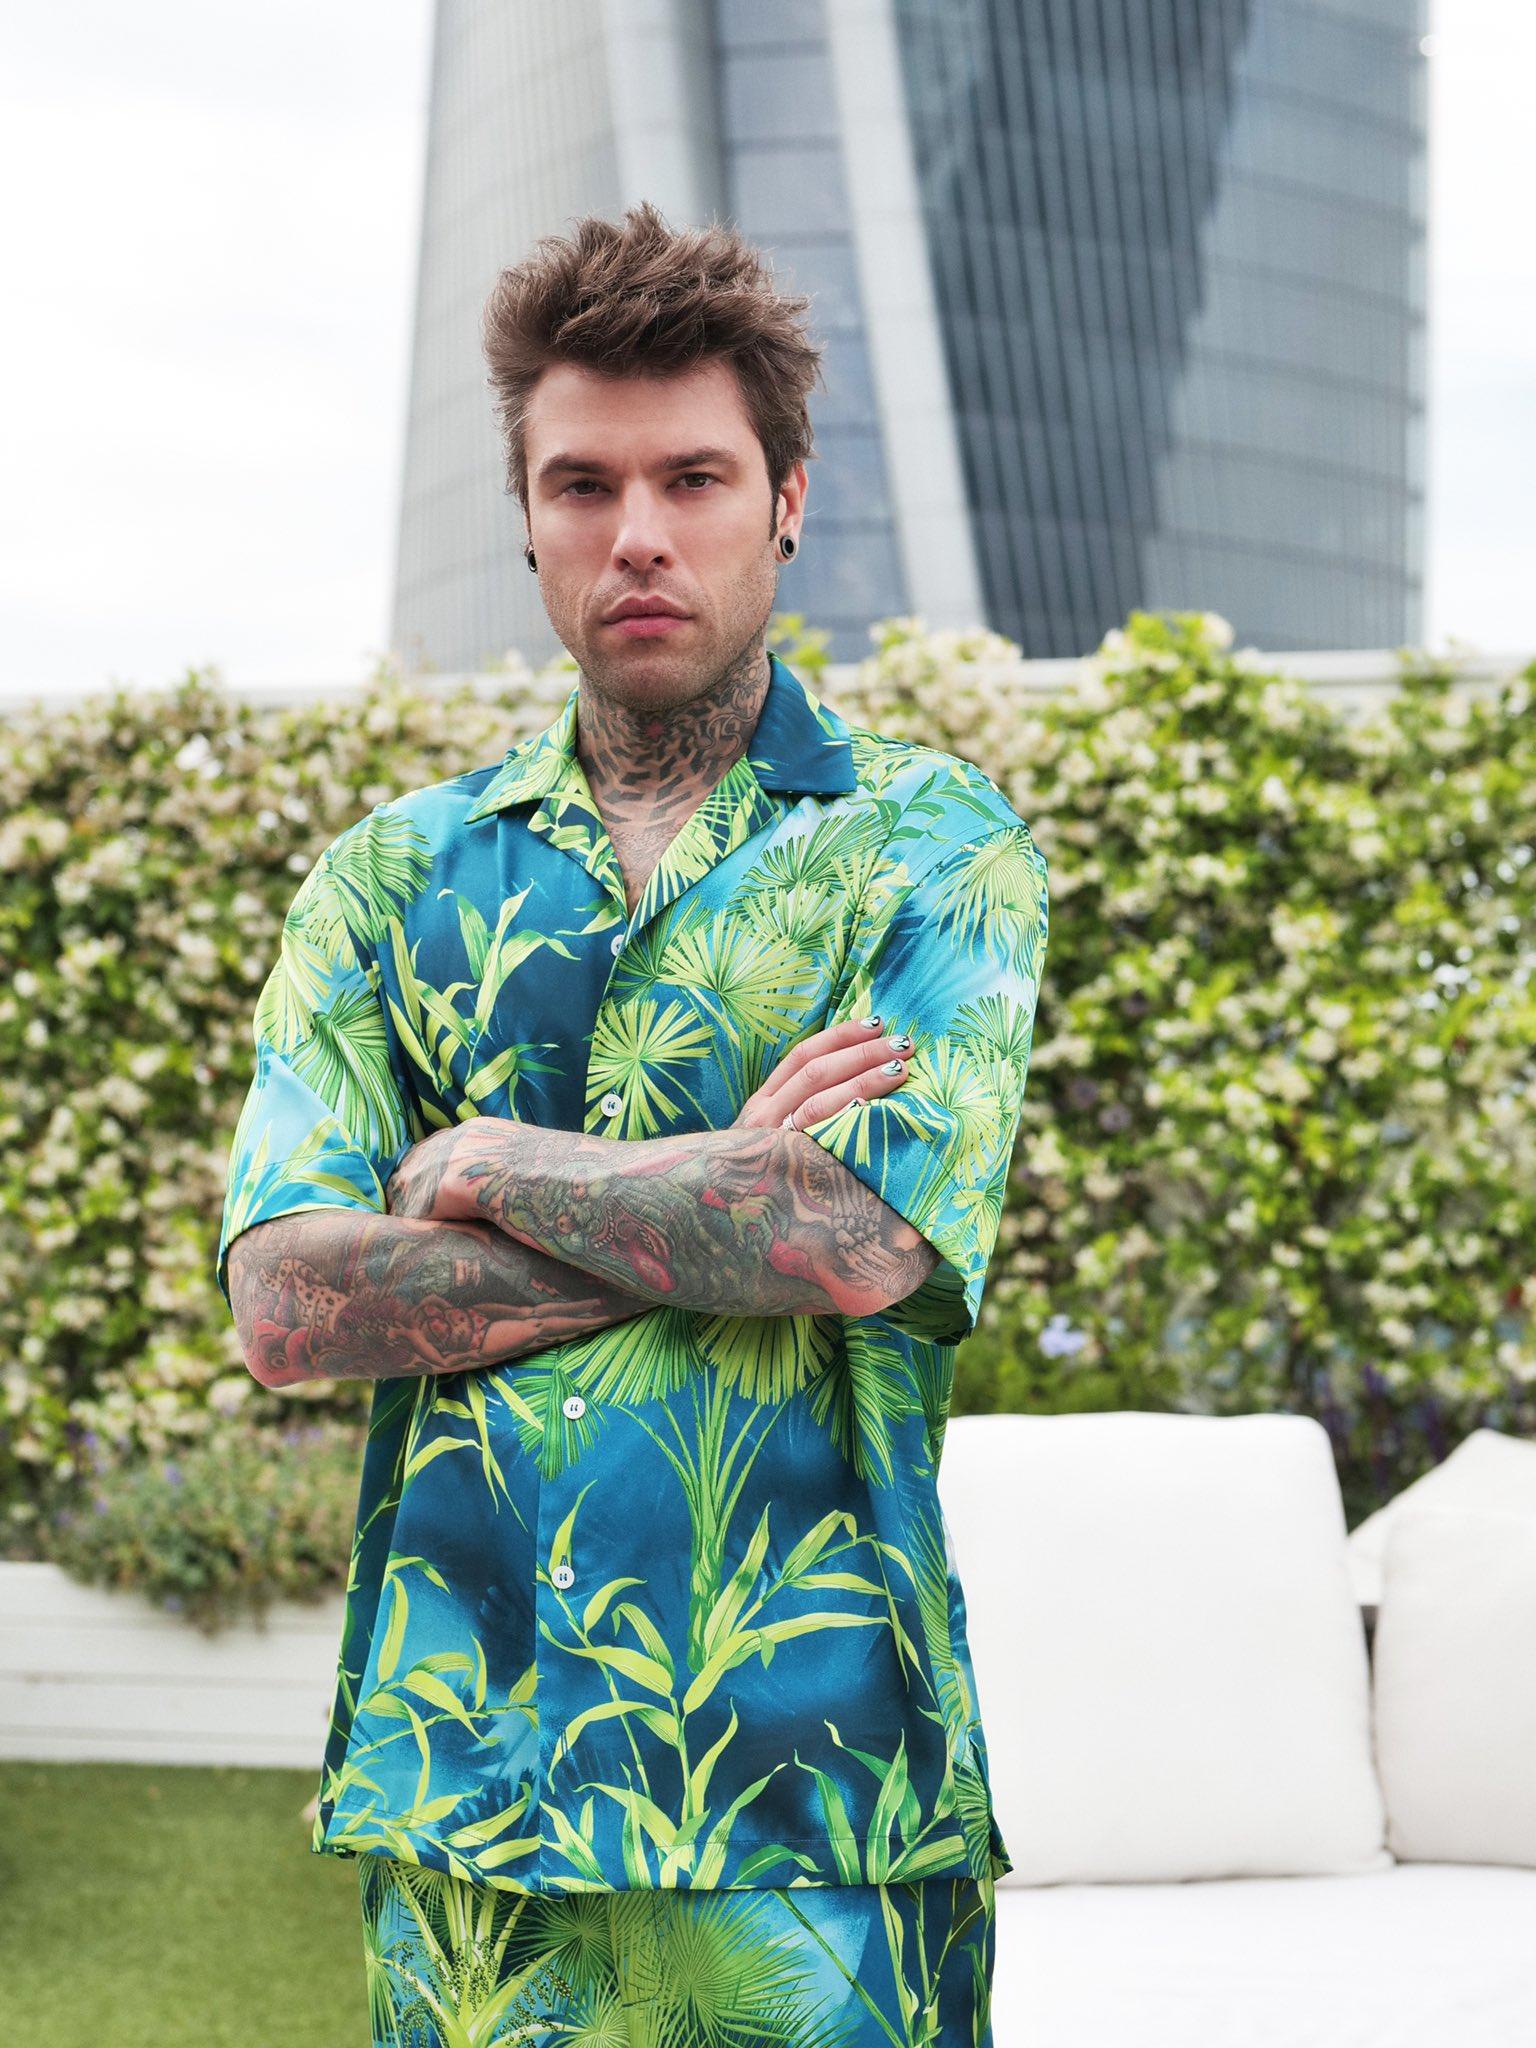 new VERSACE 2020 Iconic JLo Jungle print green tropical print shirt EU38 S 
Reference: TGAS/C01003 
Brand: Versace 
Designer: Donatella Versace 
Collection: Spring Summer 2020 Jungle Collection 
As seen on: Fedez, Robbie Williams 
Material: